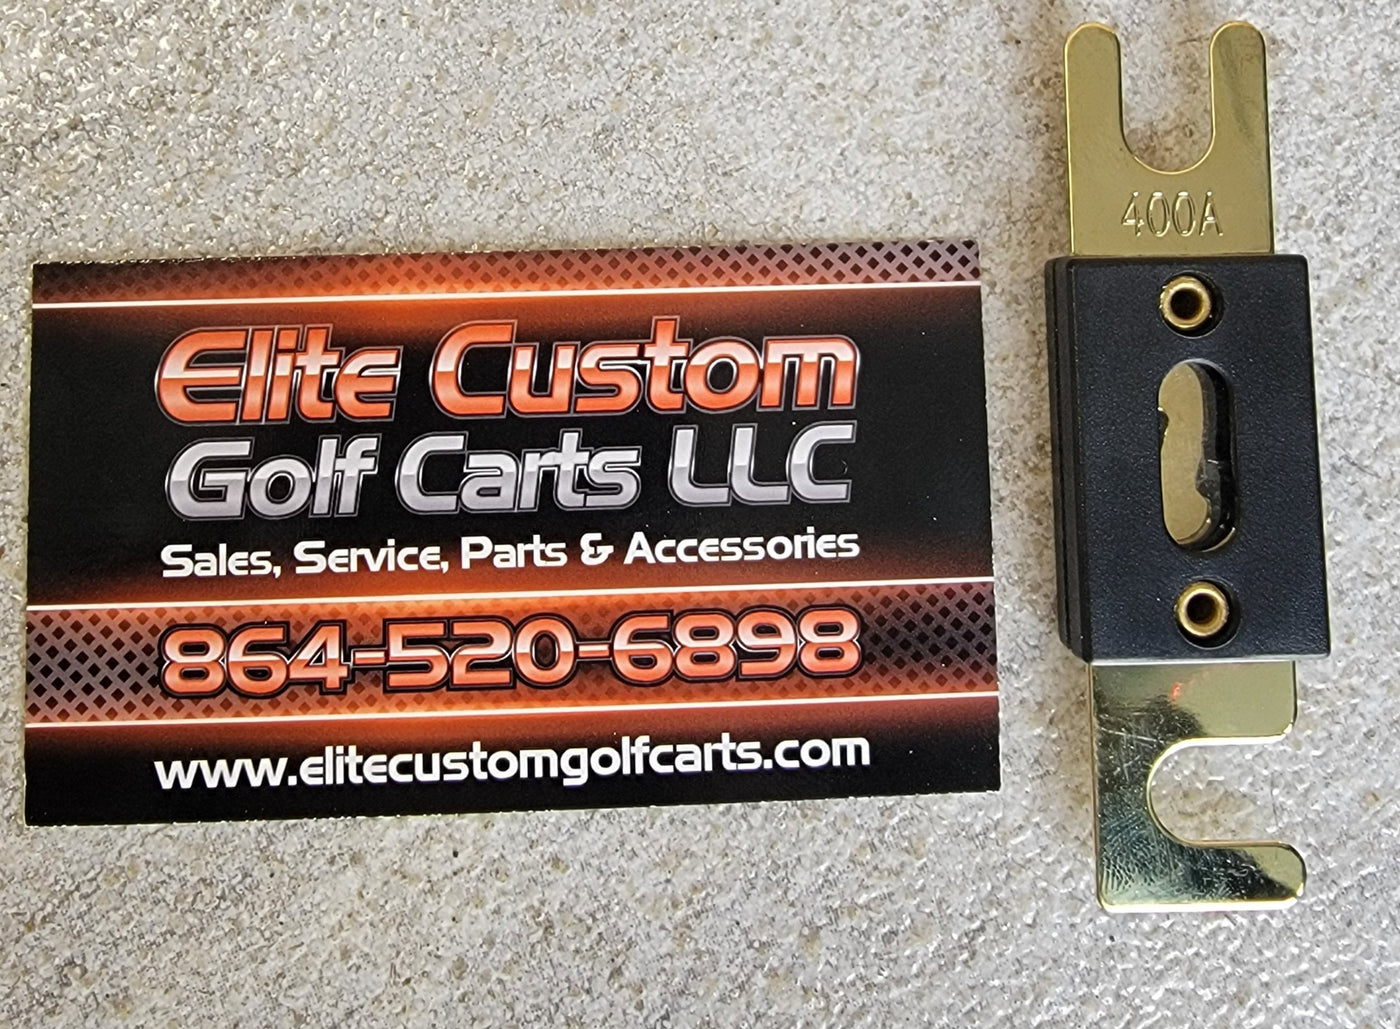 Evolution Golf Cart 400 Amp Main Fuse Fits Classic Plus, Classic Pro, Forrester Plus and Carrier Plus Models